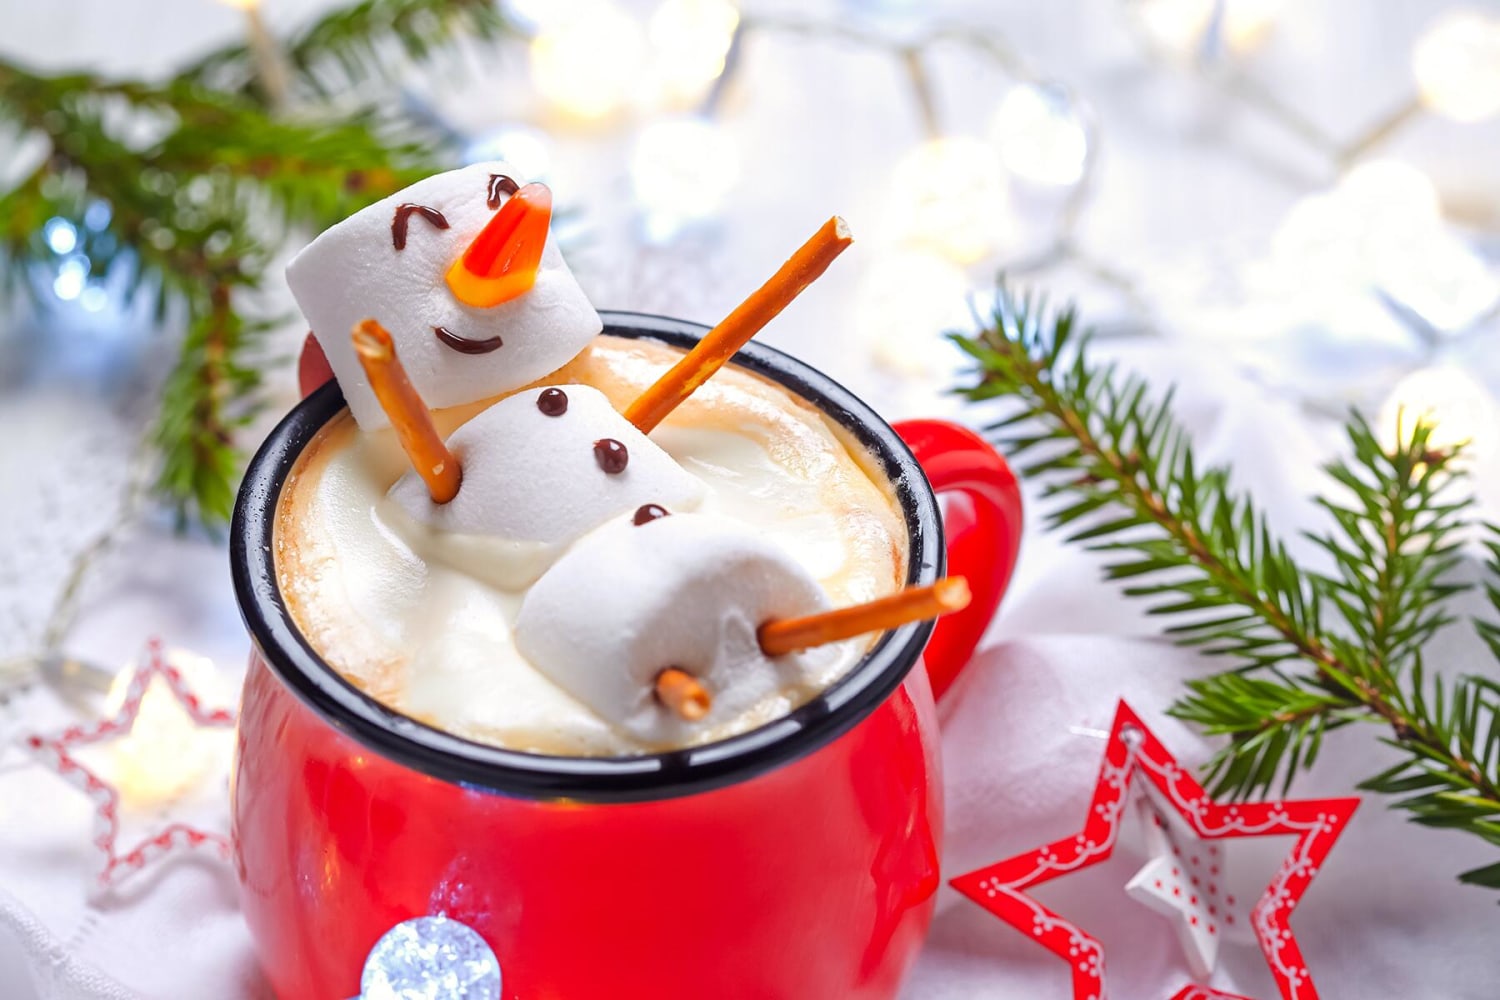 Cozy up With These Hot Winter Drinks Around the World